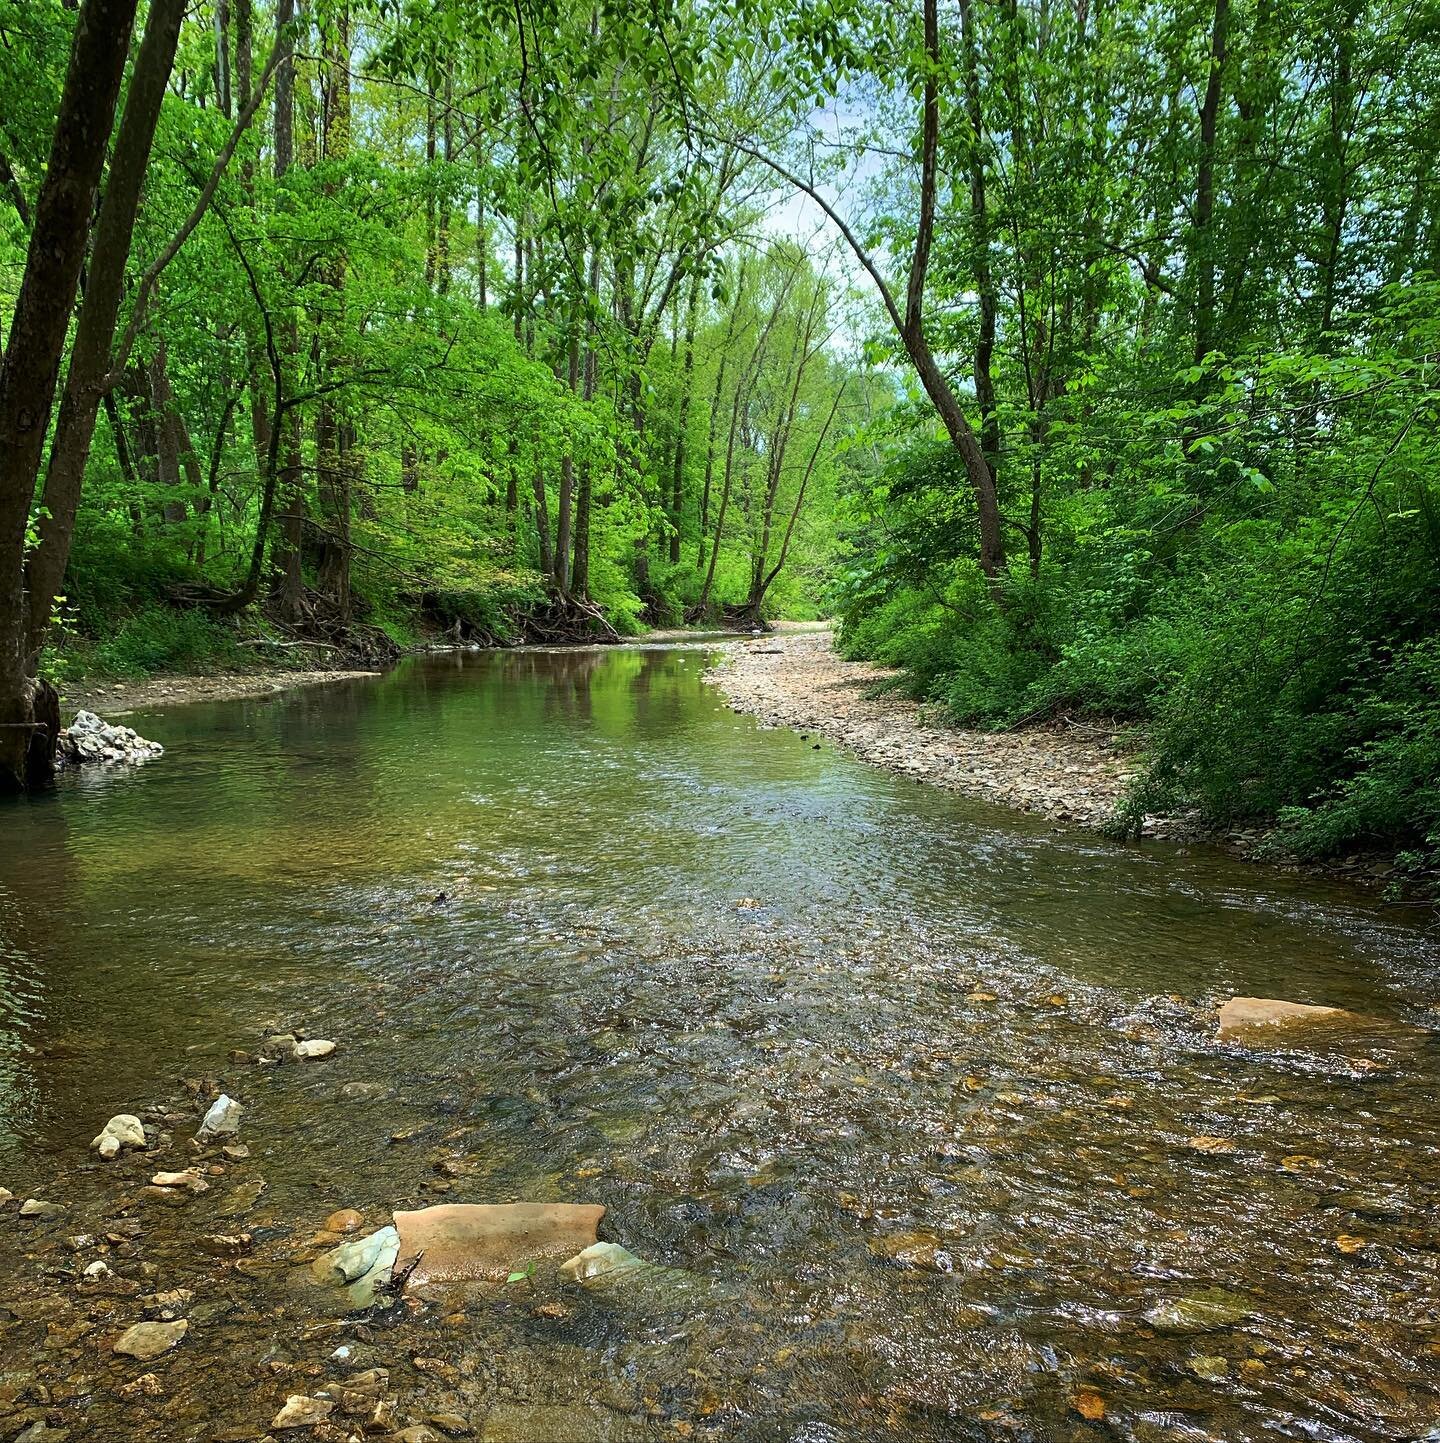 Kentucky has more miles of river than any other state in the continental US. Some of those miles are prettier than others. 😉
.
#kentuckyiswater #northrollingfork #riparian #habitat